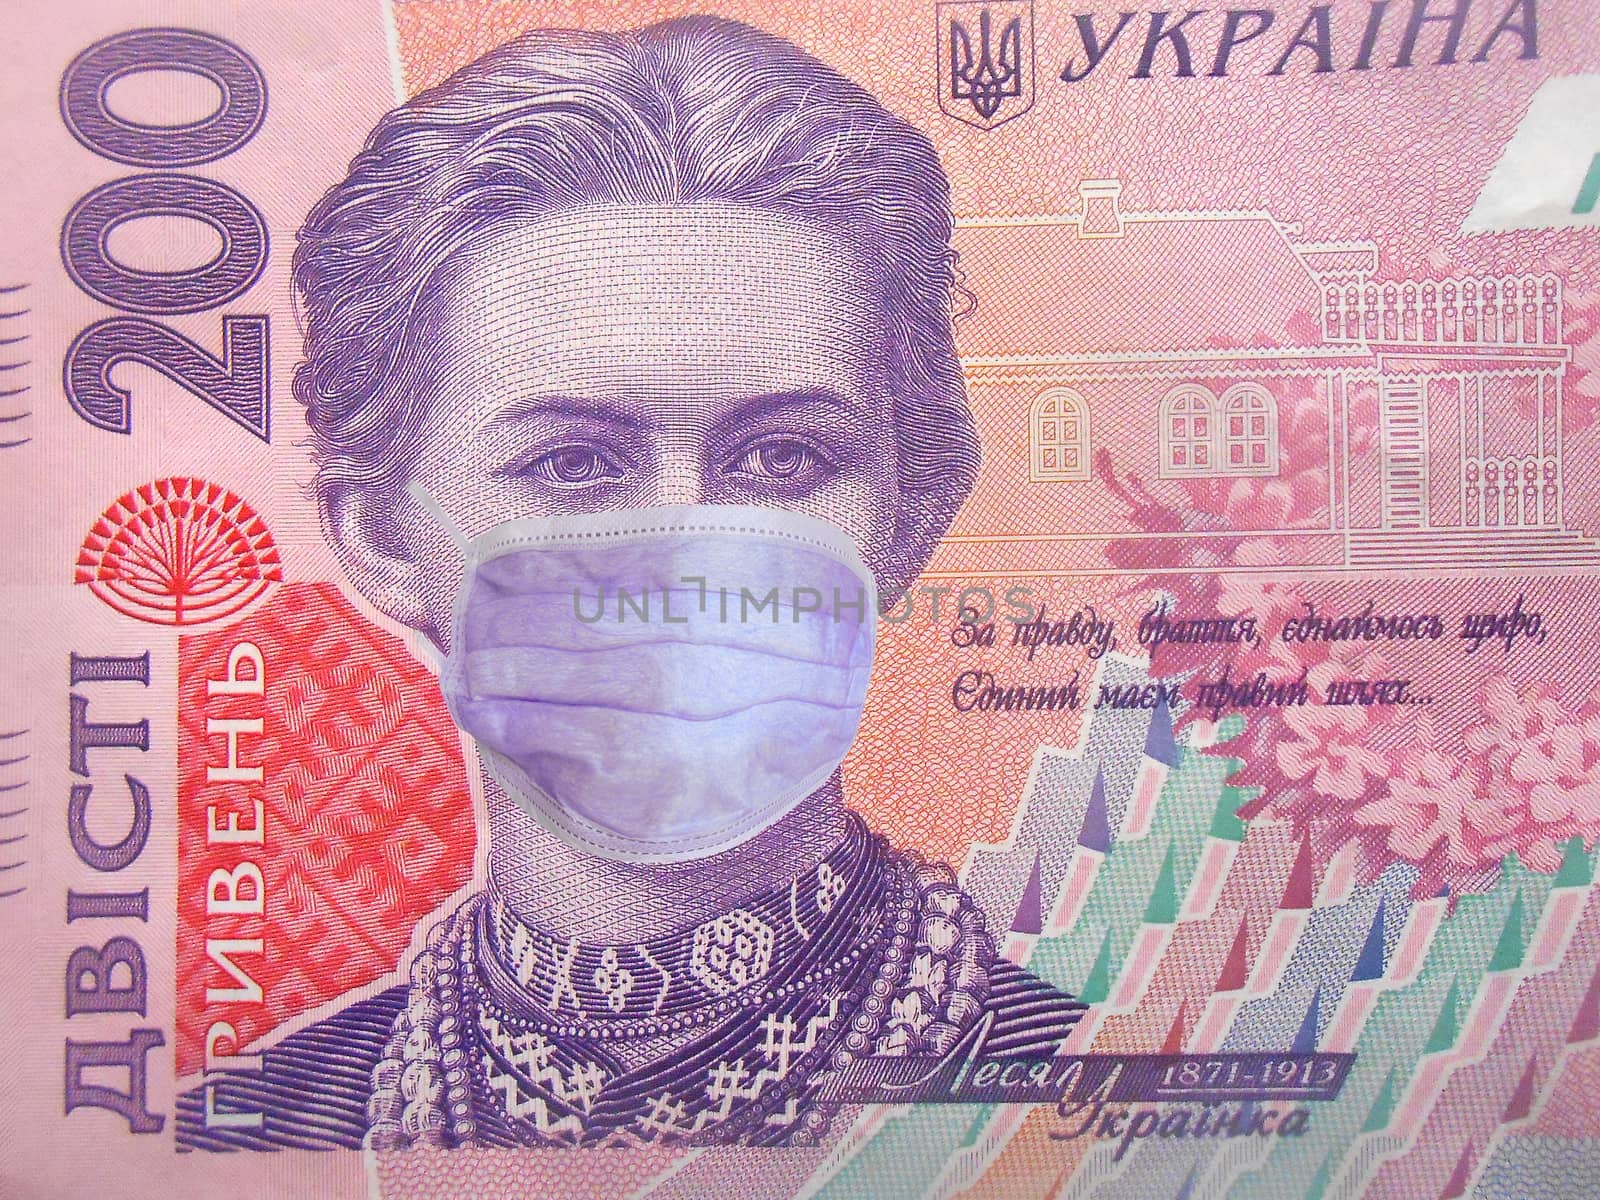 Coronavirus COVID-19 in Ukraine. 200 ukrainian money hryvnia money bill with face mask. World economy hit by corona virus outbreak and pandemic fears. Coronavirus affects global stock market. Finance and crisis concept. by fotoscool